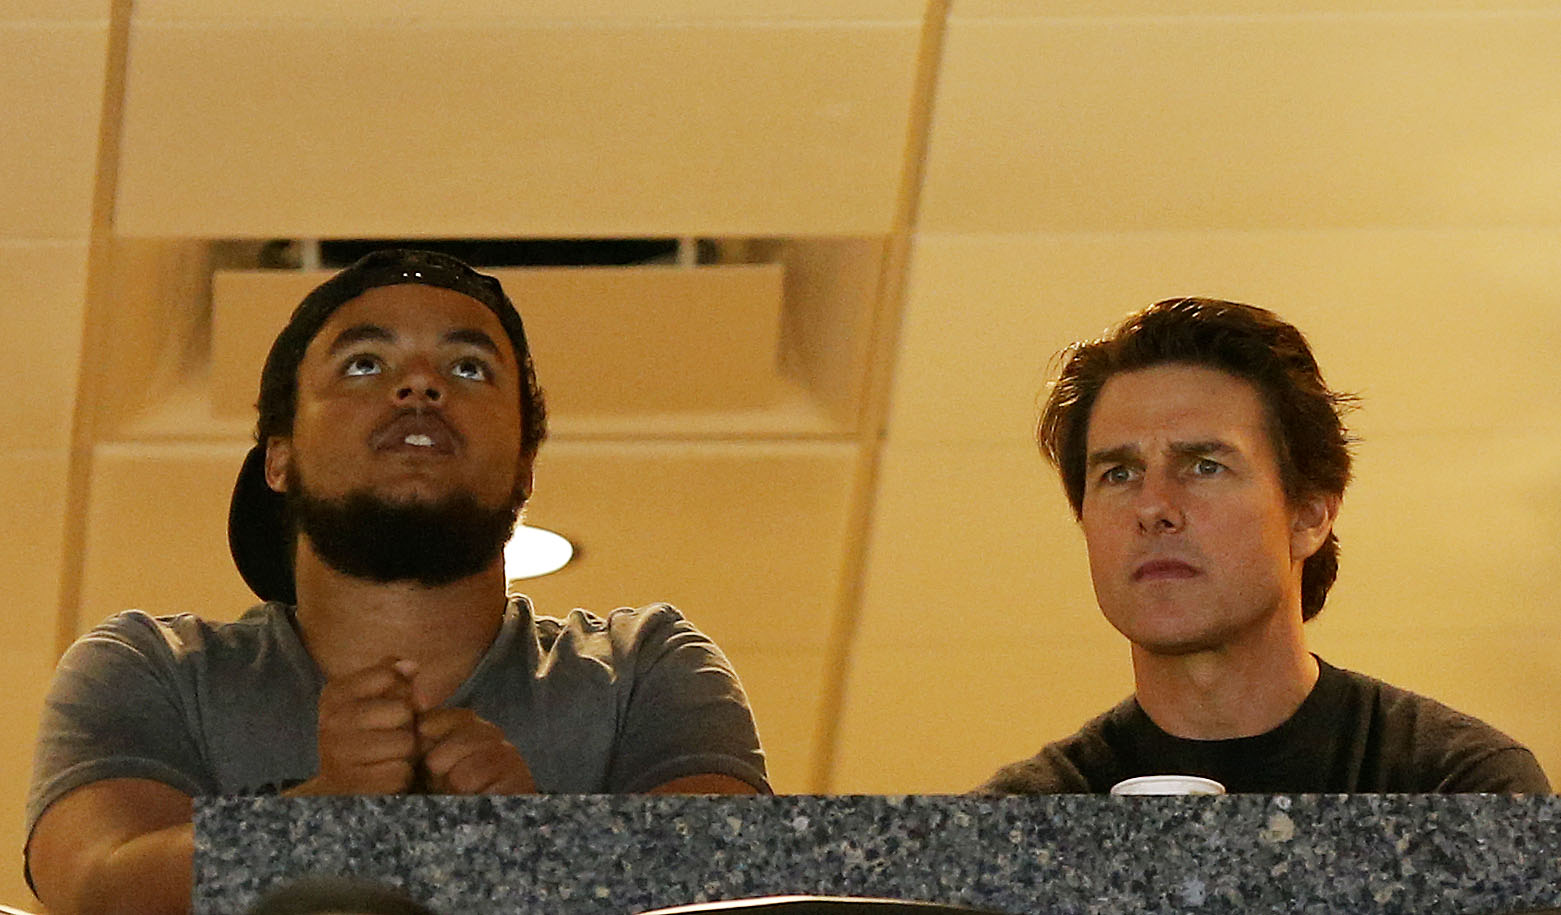 Connor and Tom Cruise at Amalie Arena on April 5, 2015, in Tampa, Florida. | Source: Getty Images